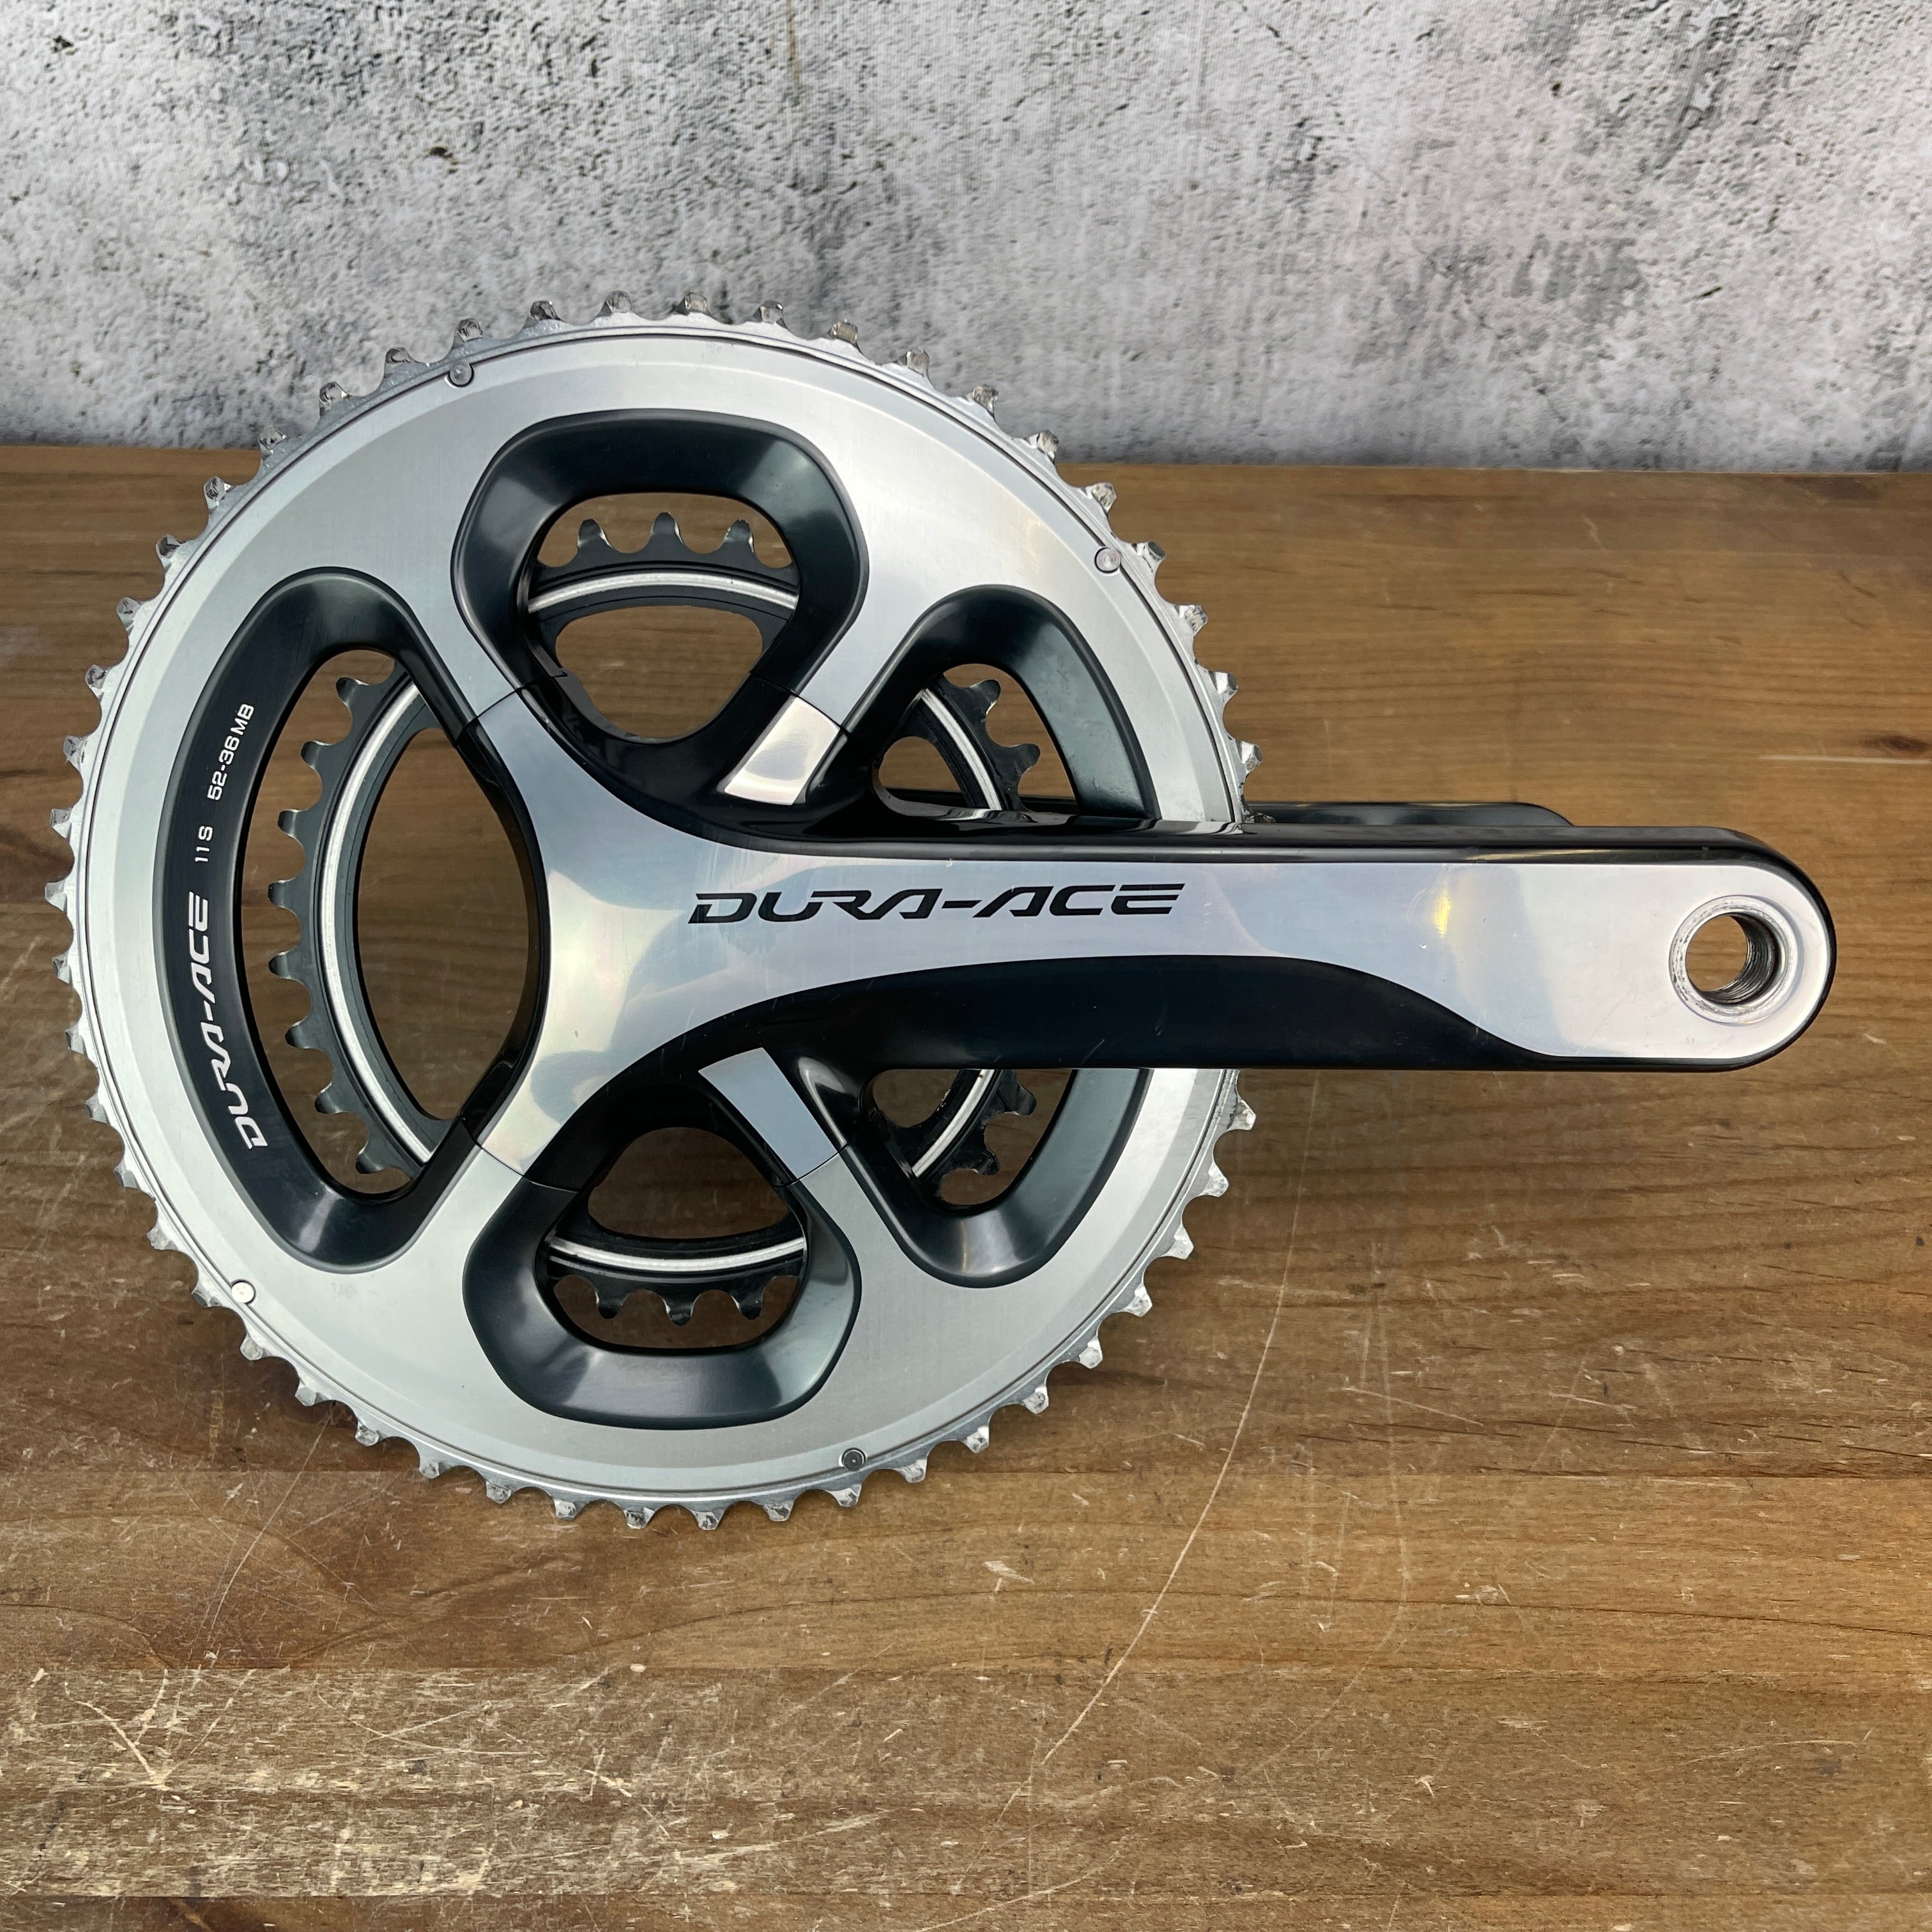 Shimano Dura-Ace FC-9000 52/36t Stages Left Side Power Meter Crankset –  CyclingUpgrades.com